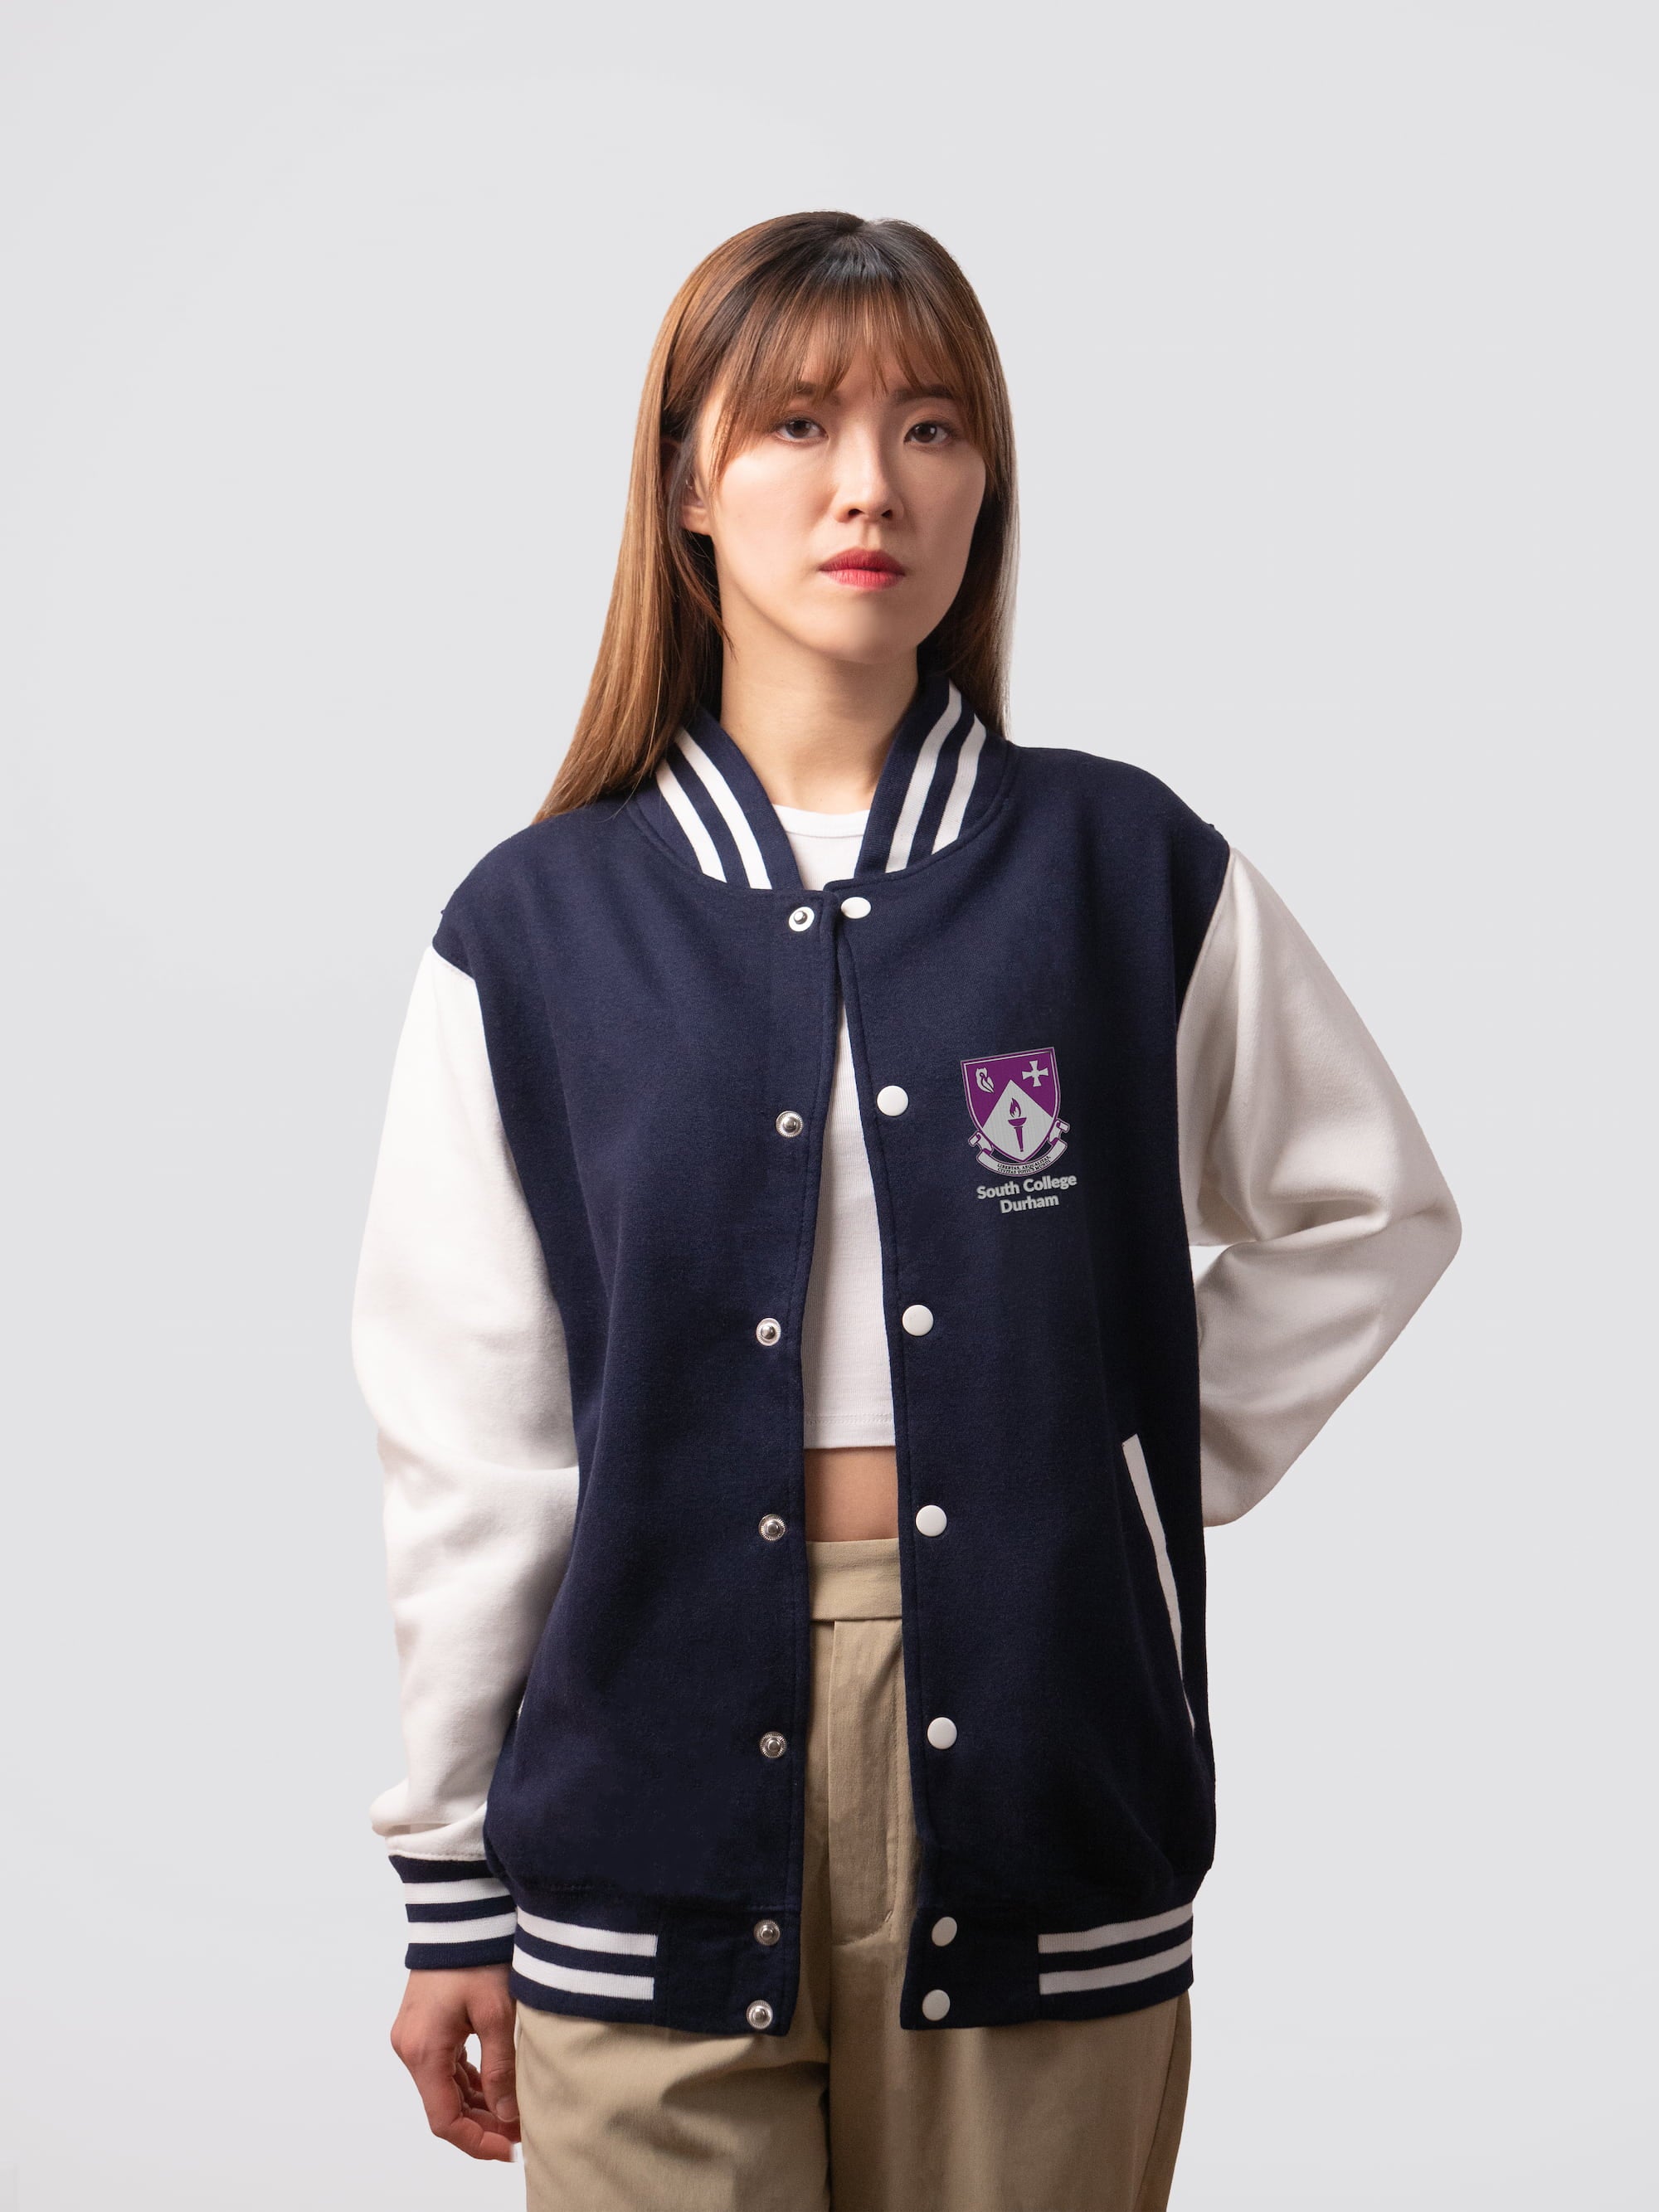 Retro style varsity jacket, with embroidered South crest